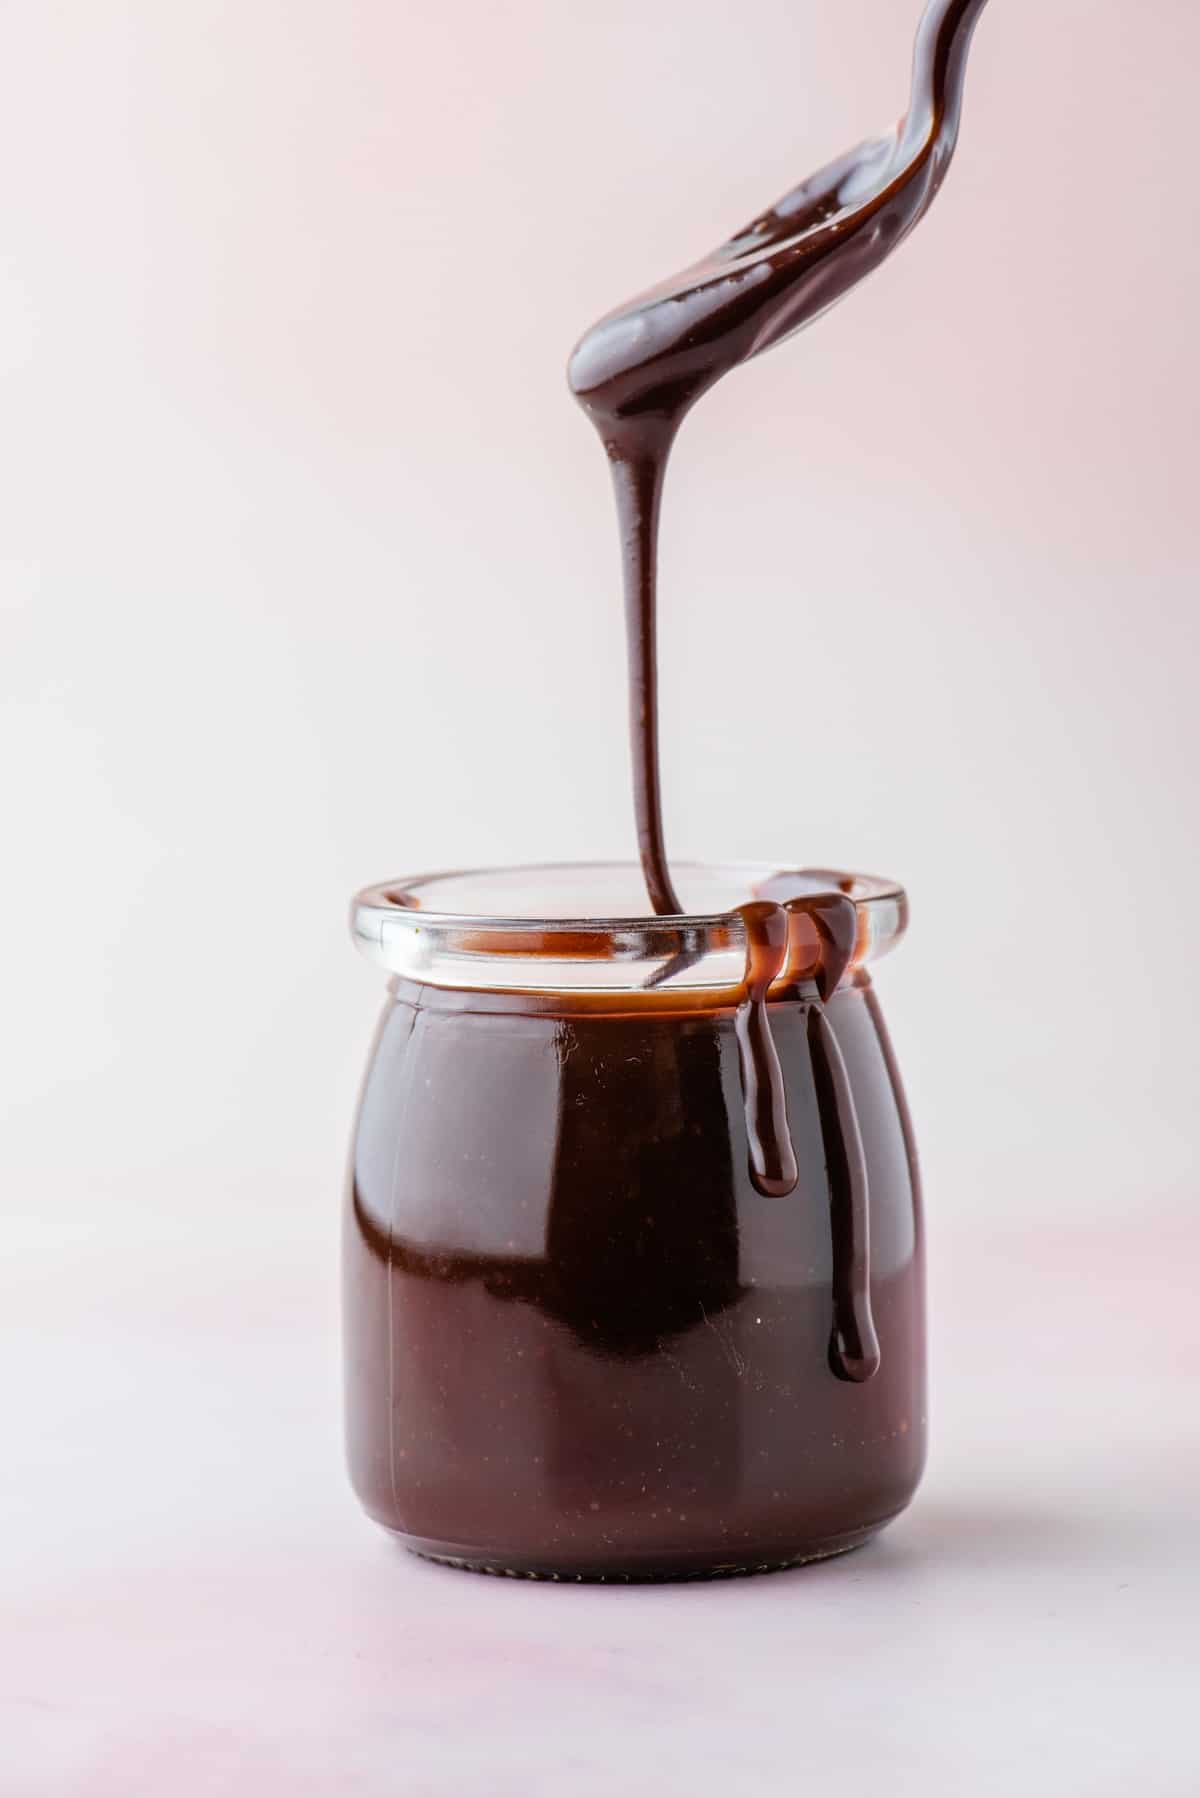 hot fudge sauce in a glass jar with a spoon showing the thick warm sauce dripping down into the jar